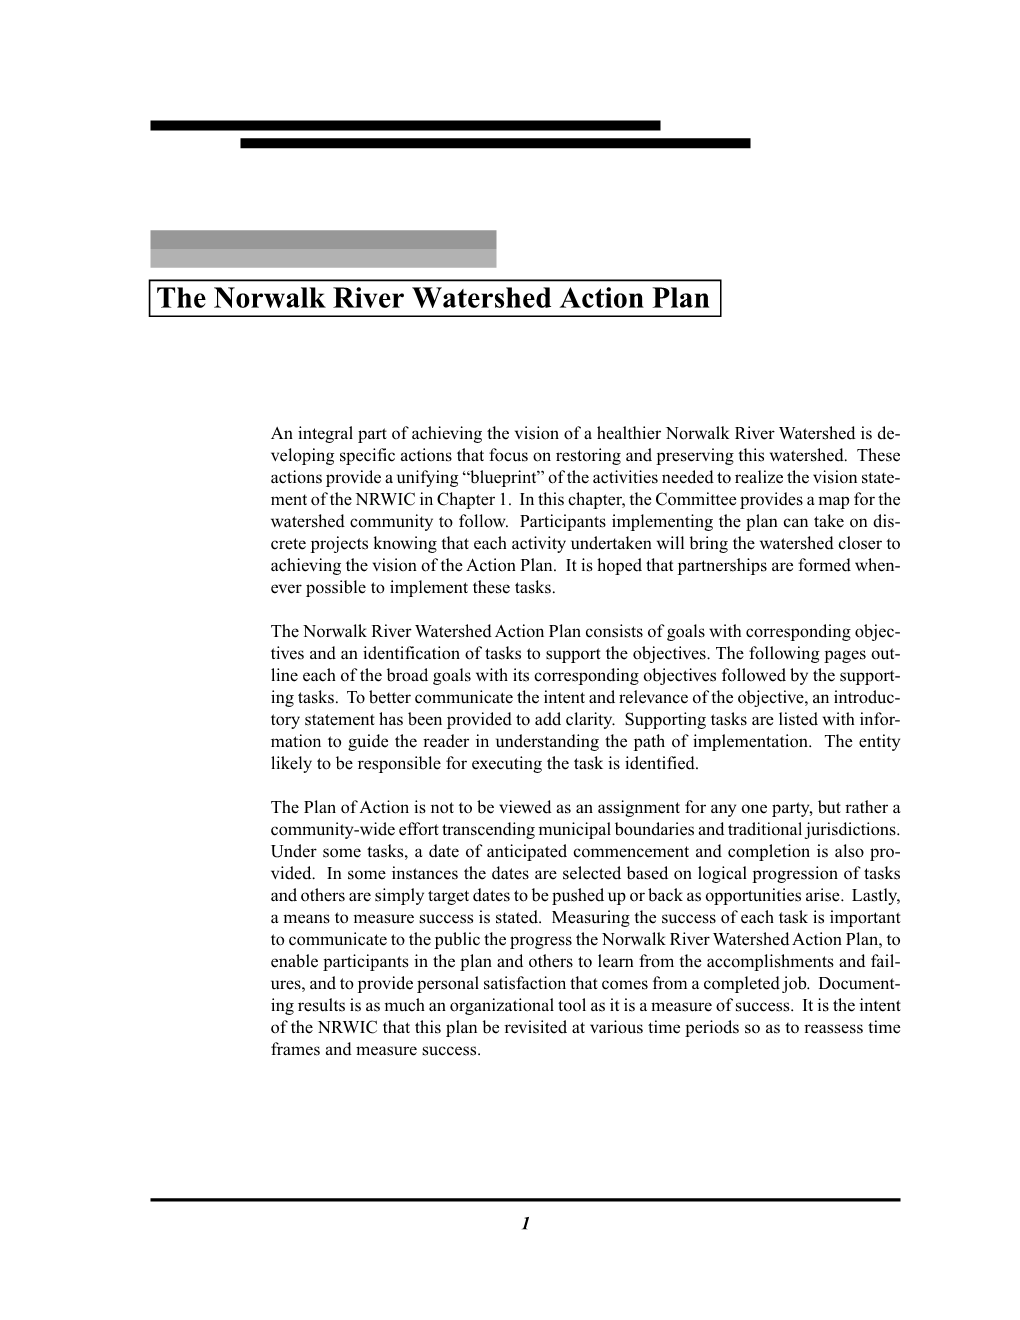 The Norwalk River Watershed Action Plan